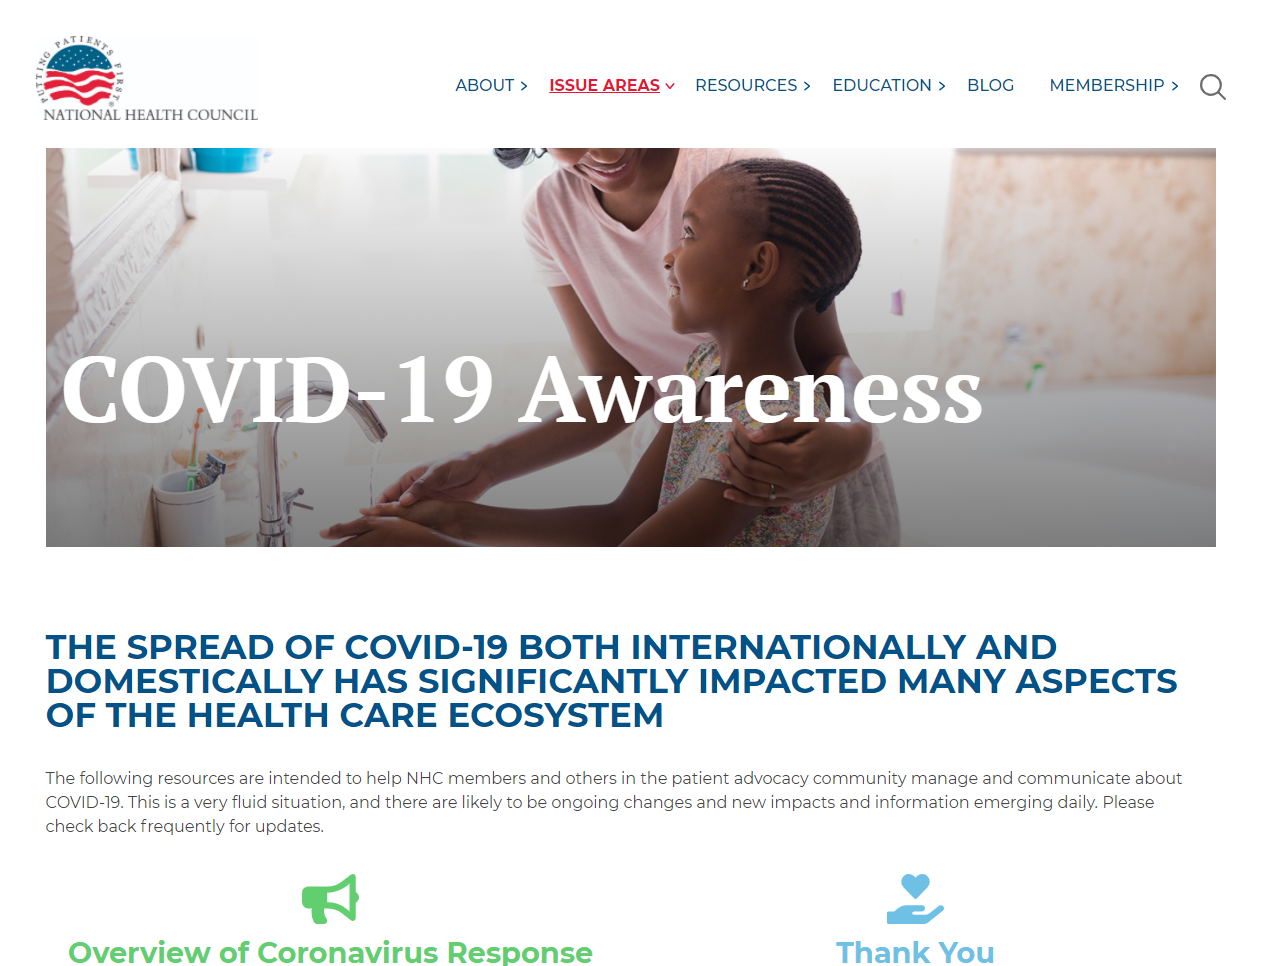 COVID-19 Information & Resources for Caregivers